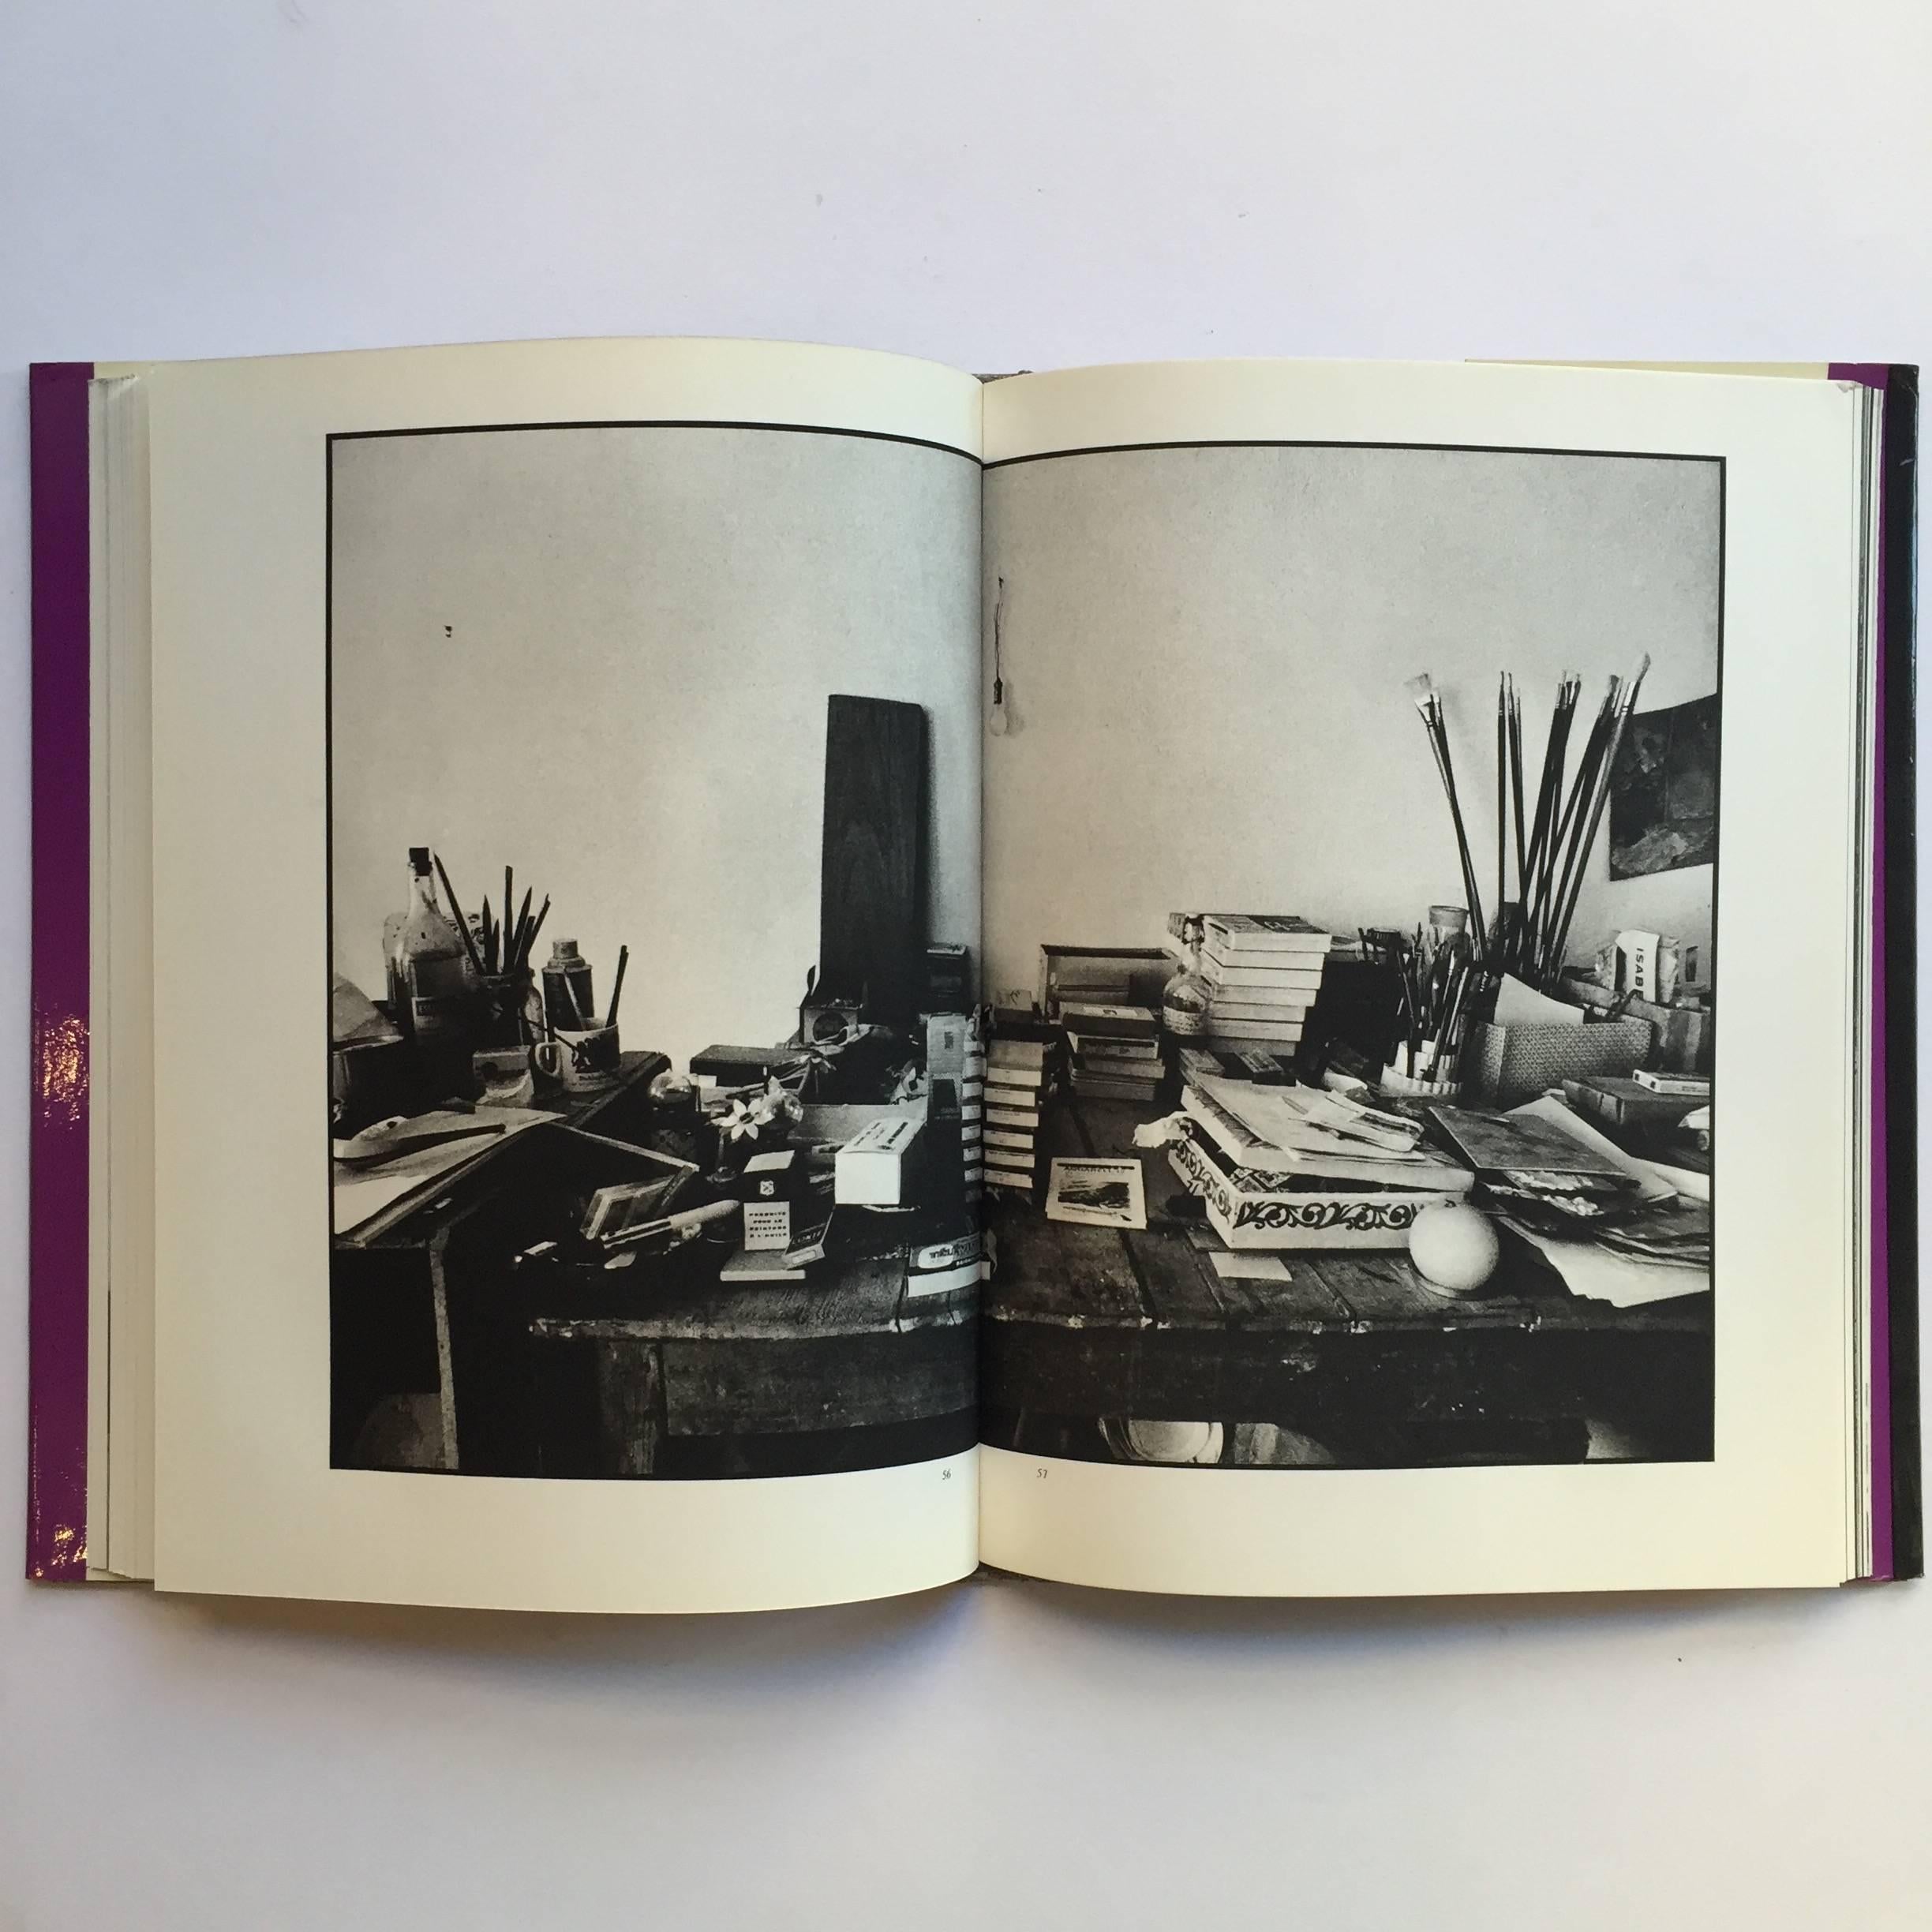 First edition, published by Collins, 1976

This book, The Silent studio, marks Picasso’s death with a series of photographs of his house, artworks and studio exactly how they were left. These moving black and white images possess both the solemn